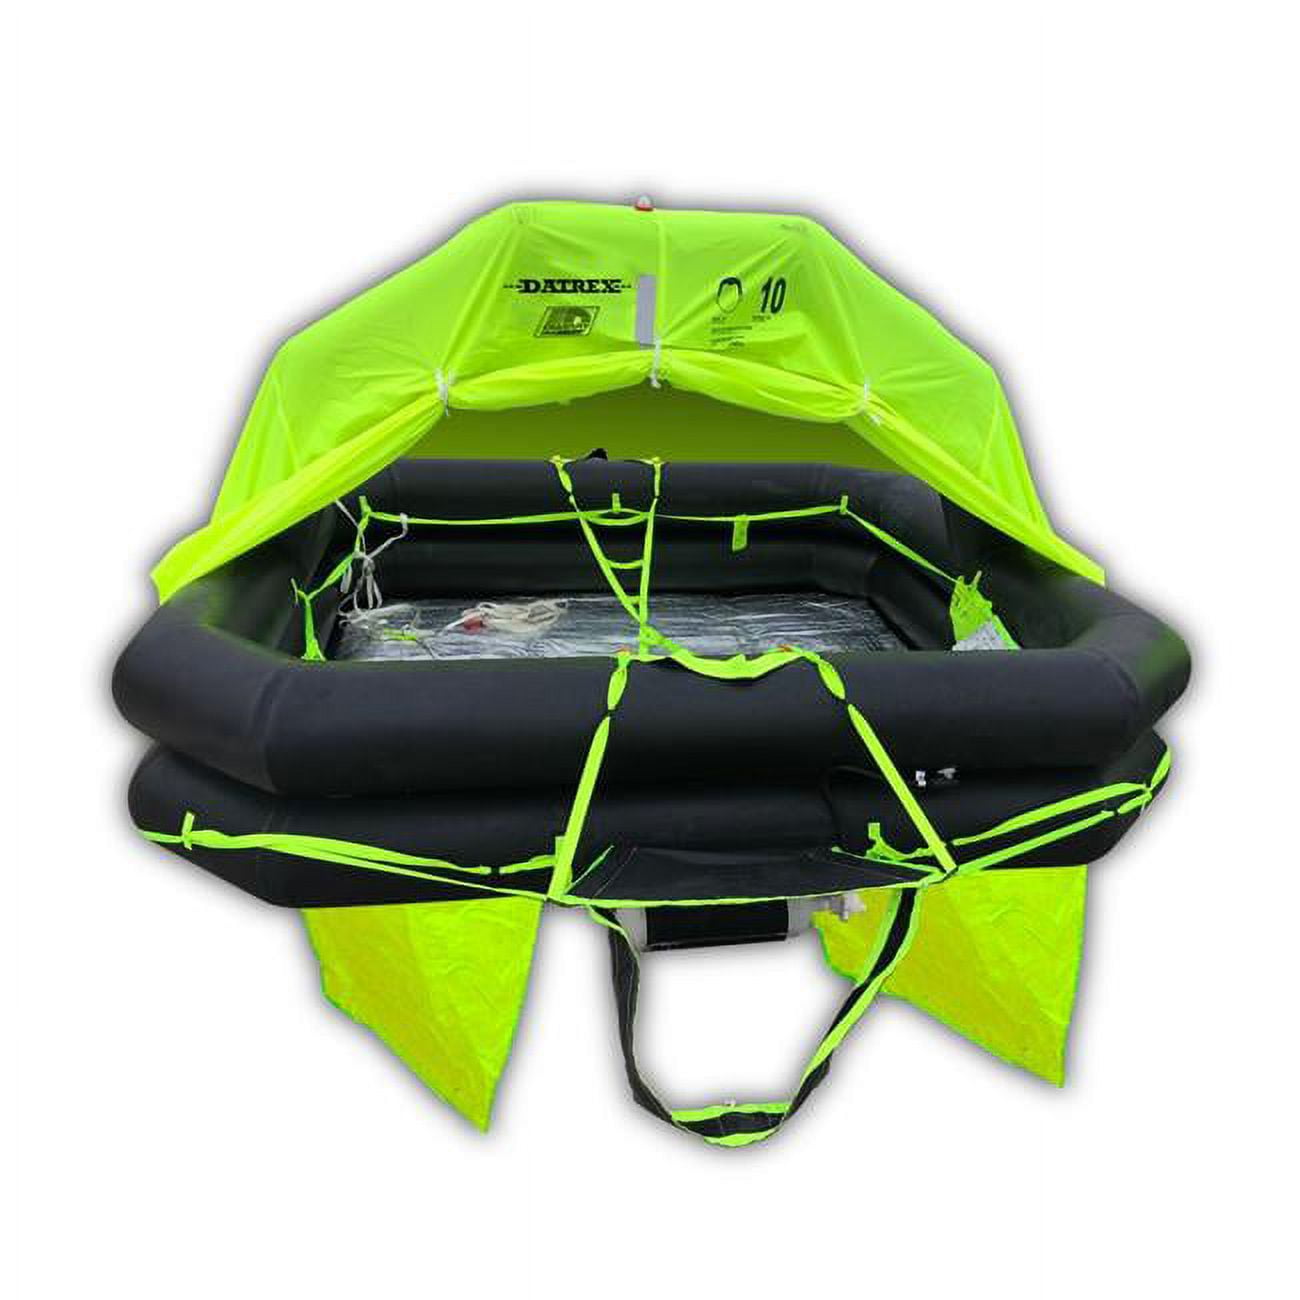 DUY8CCR 8 Person Liberty Recreational Offshore Raft with Liferaft in Container -  Datrex